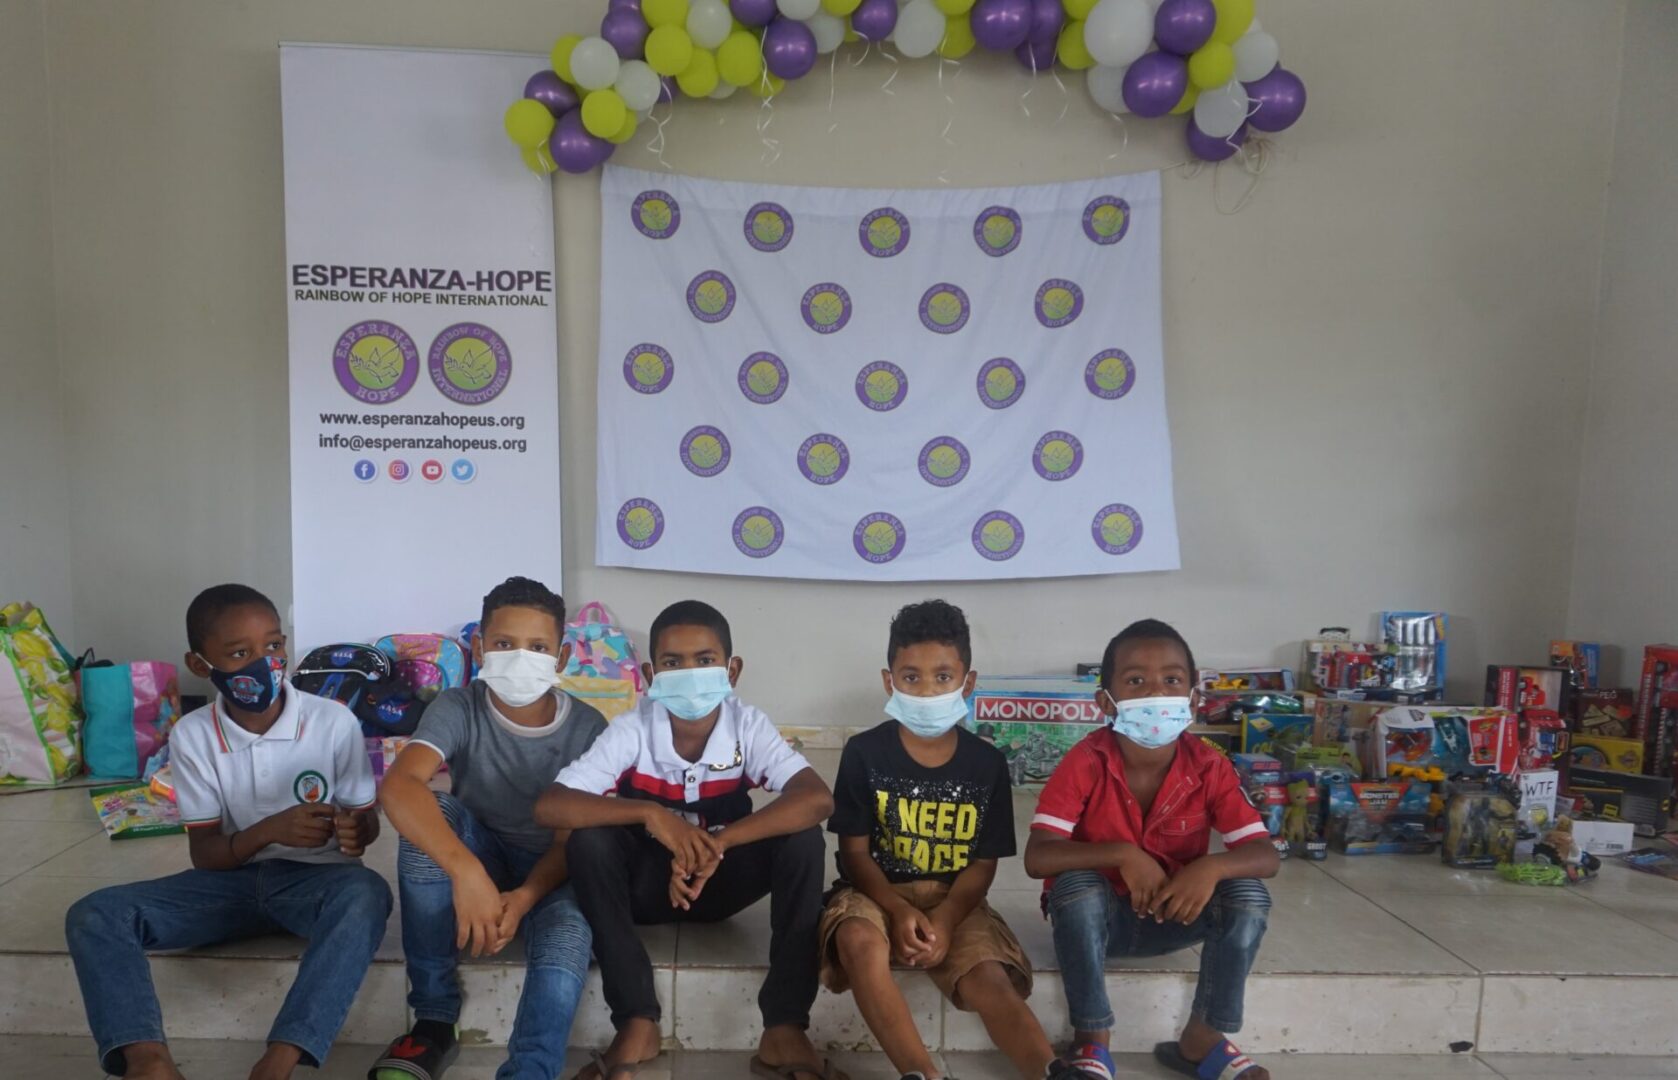 Five boys wearing masks sitting on the elevated area with many toys